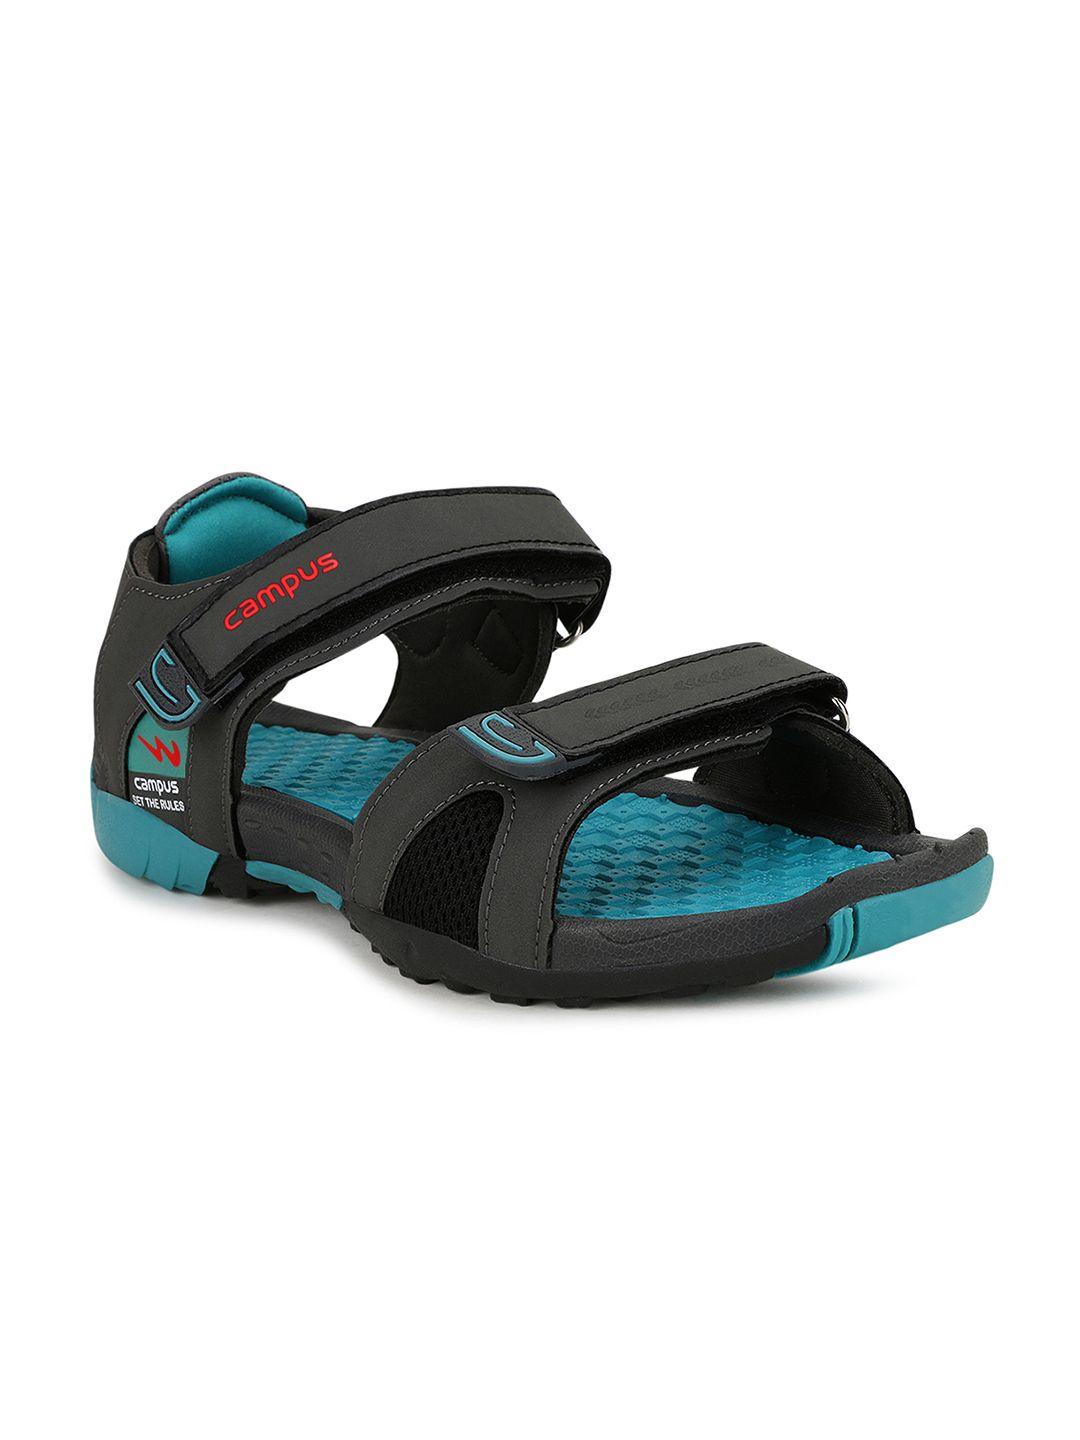 campus men charcoal grey & turquoise blue solid sports sandals